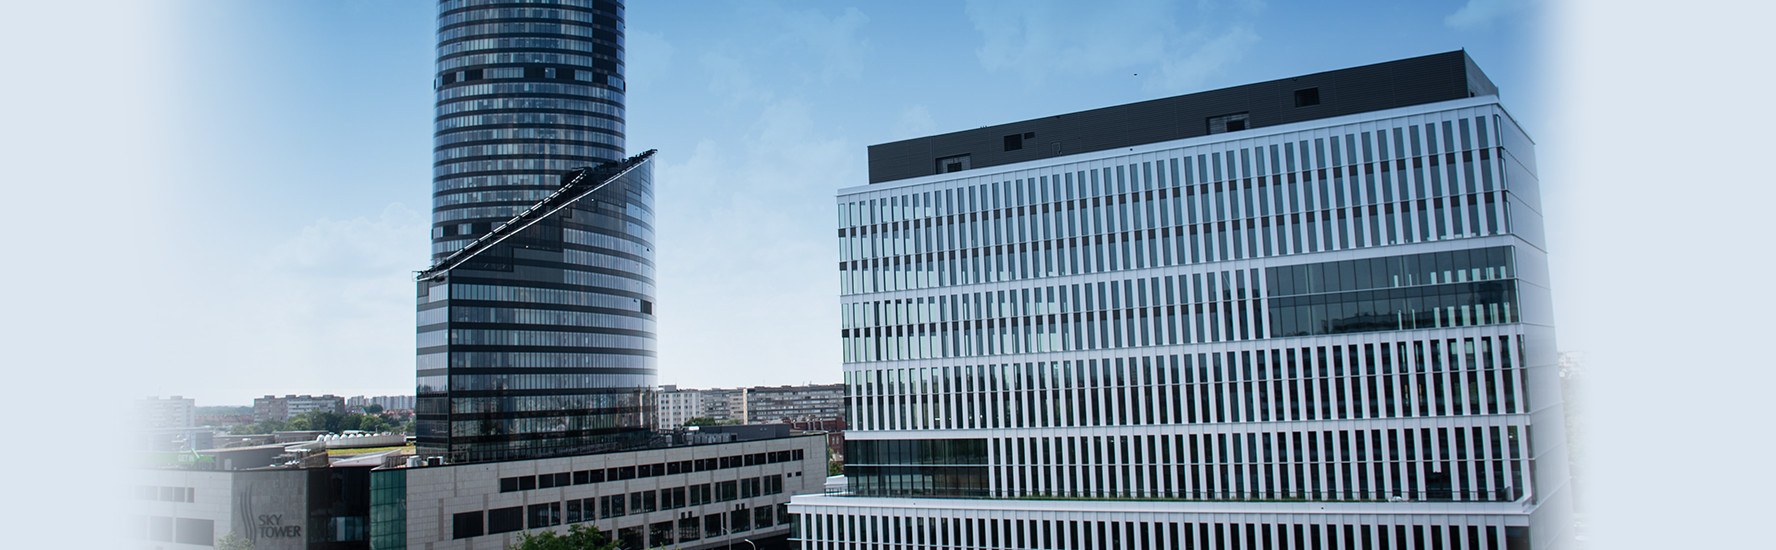 As the result of numerous global and Polish companies operating in the city, office and warehouse markets in Wroclaw are constantly growing, making the region one of the most developed in Poland.